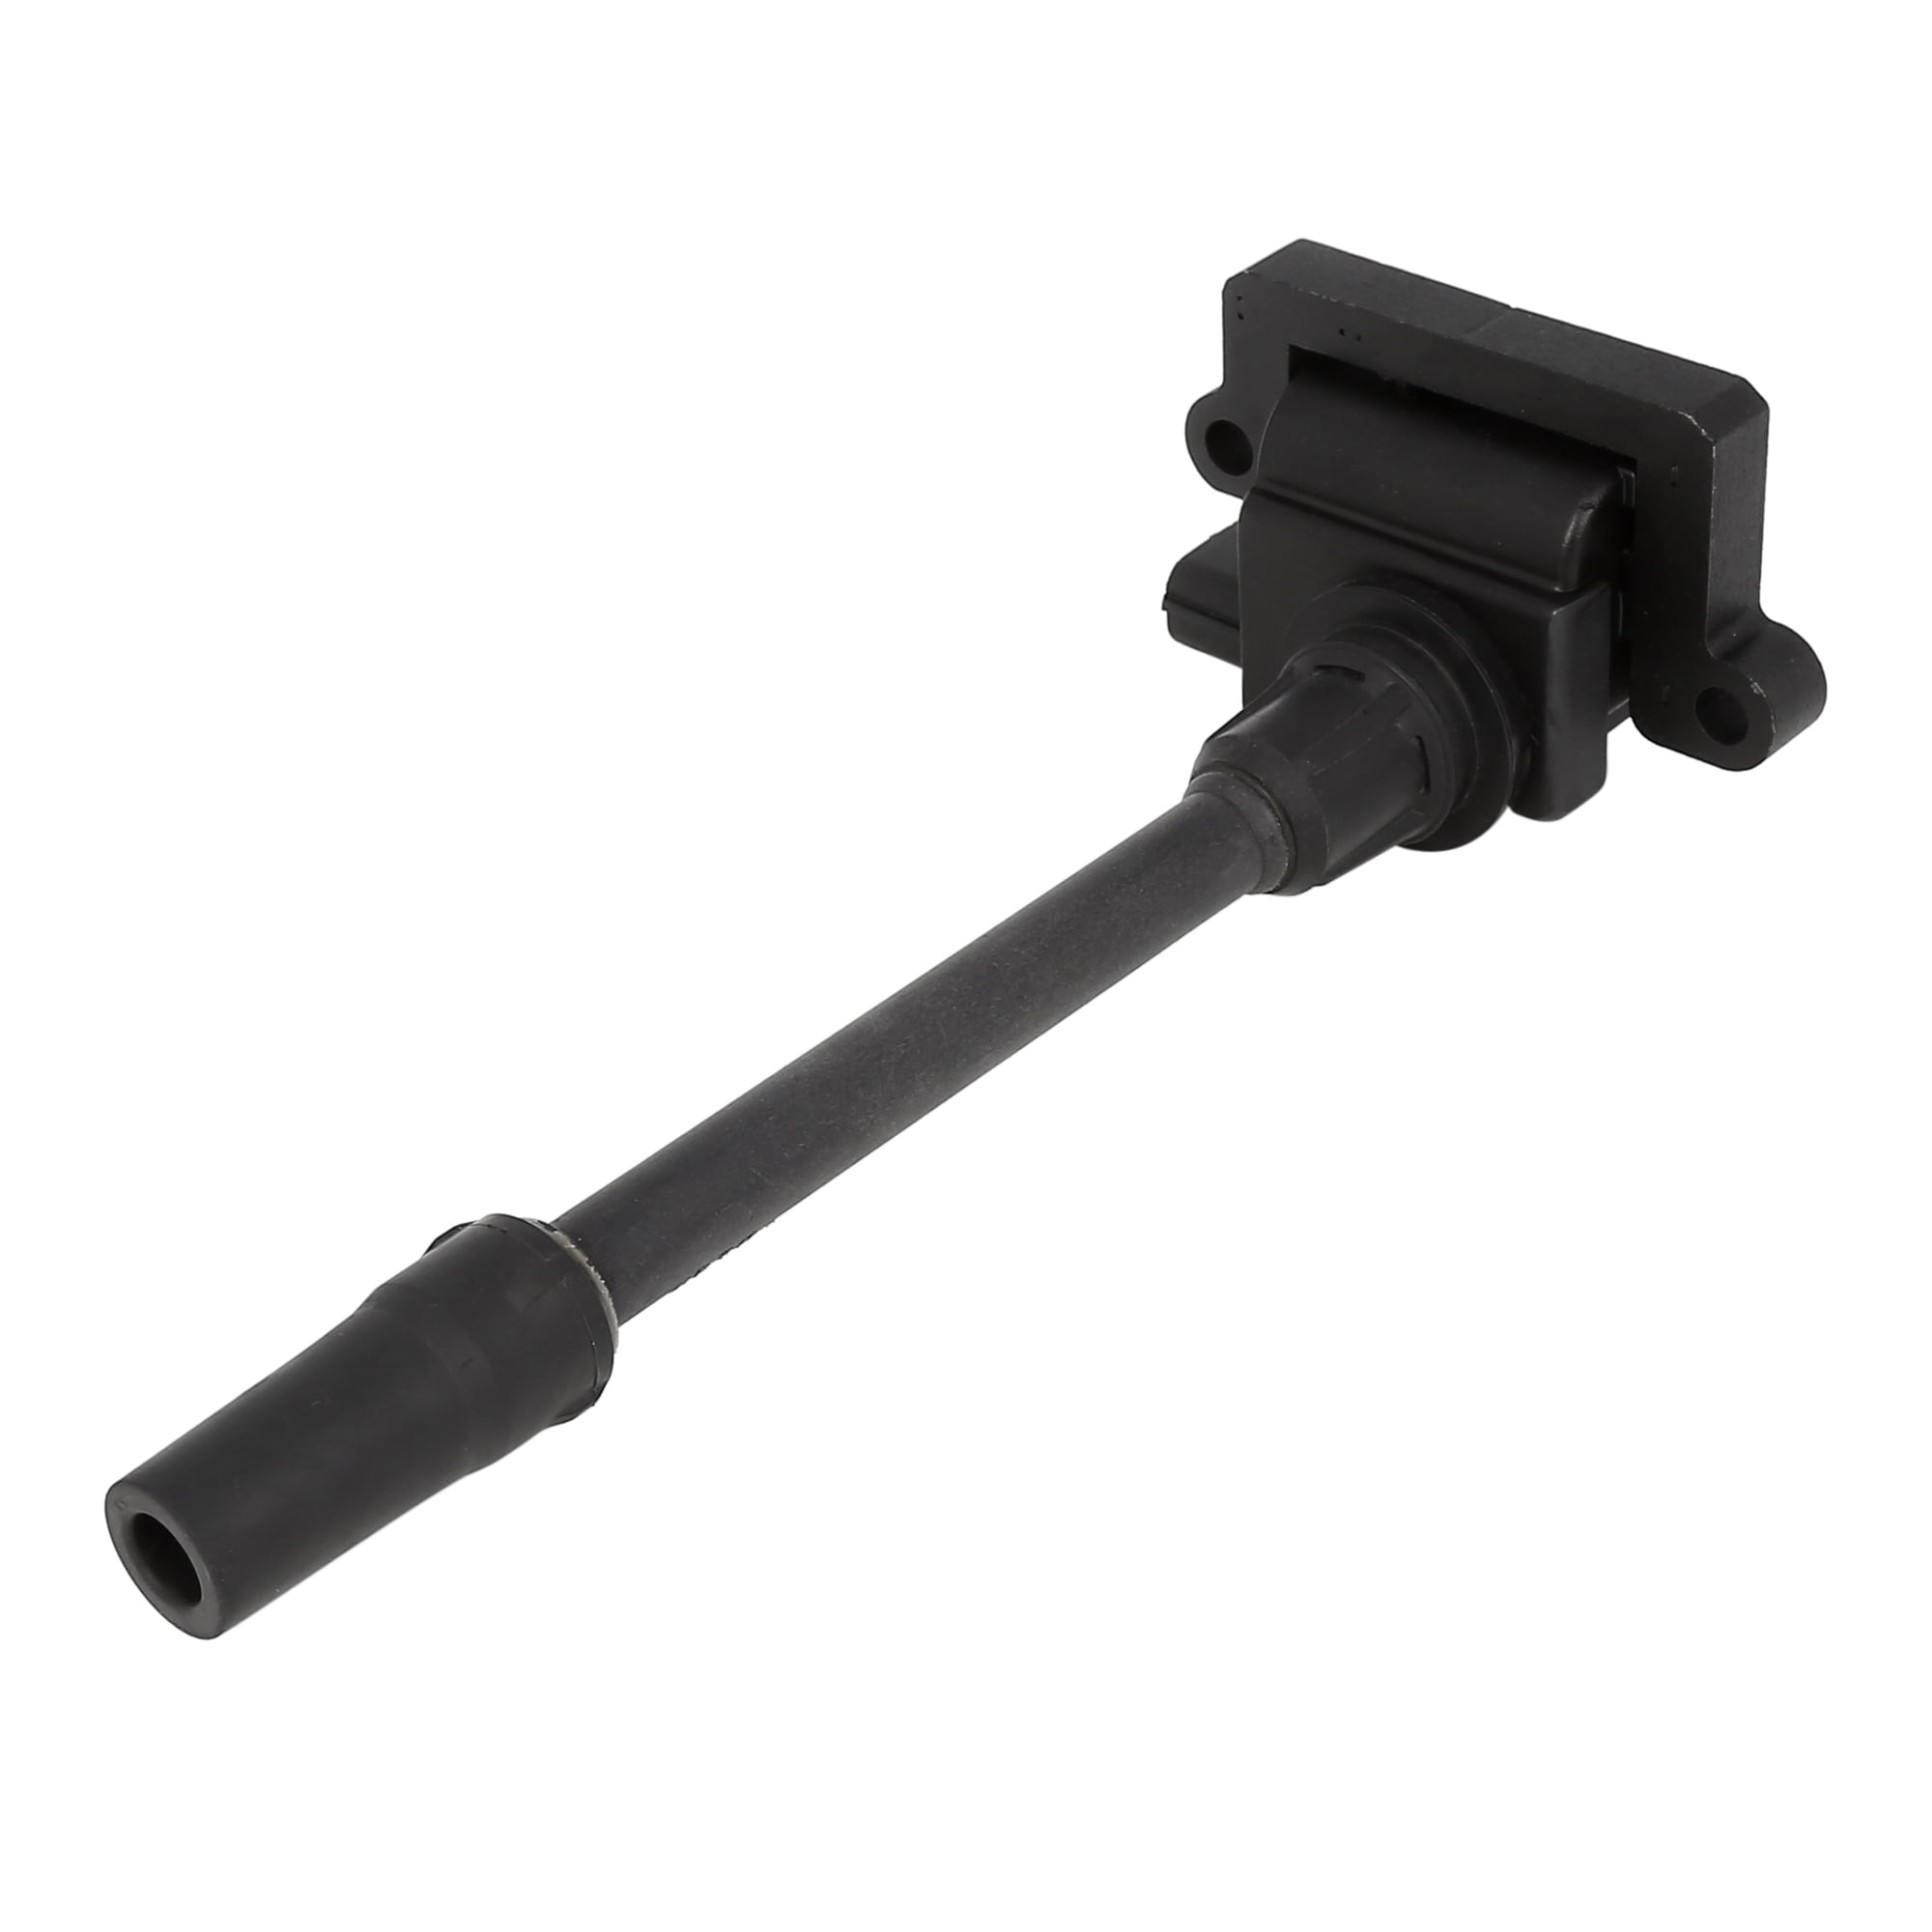 X AUTOHAUX Durable Black Ignition Coil Replacement Tool 3 Pins H6T12371 for Mitsubishi 